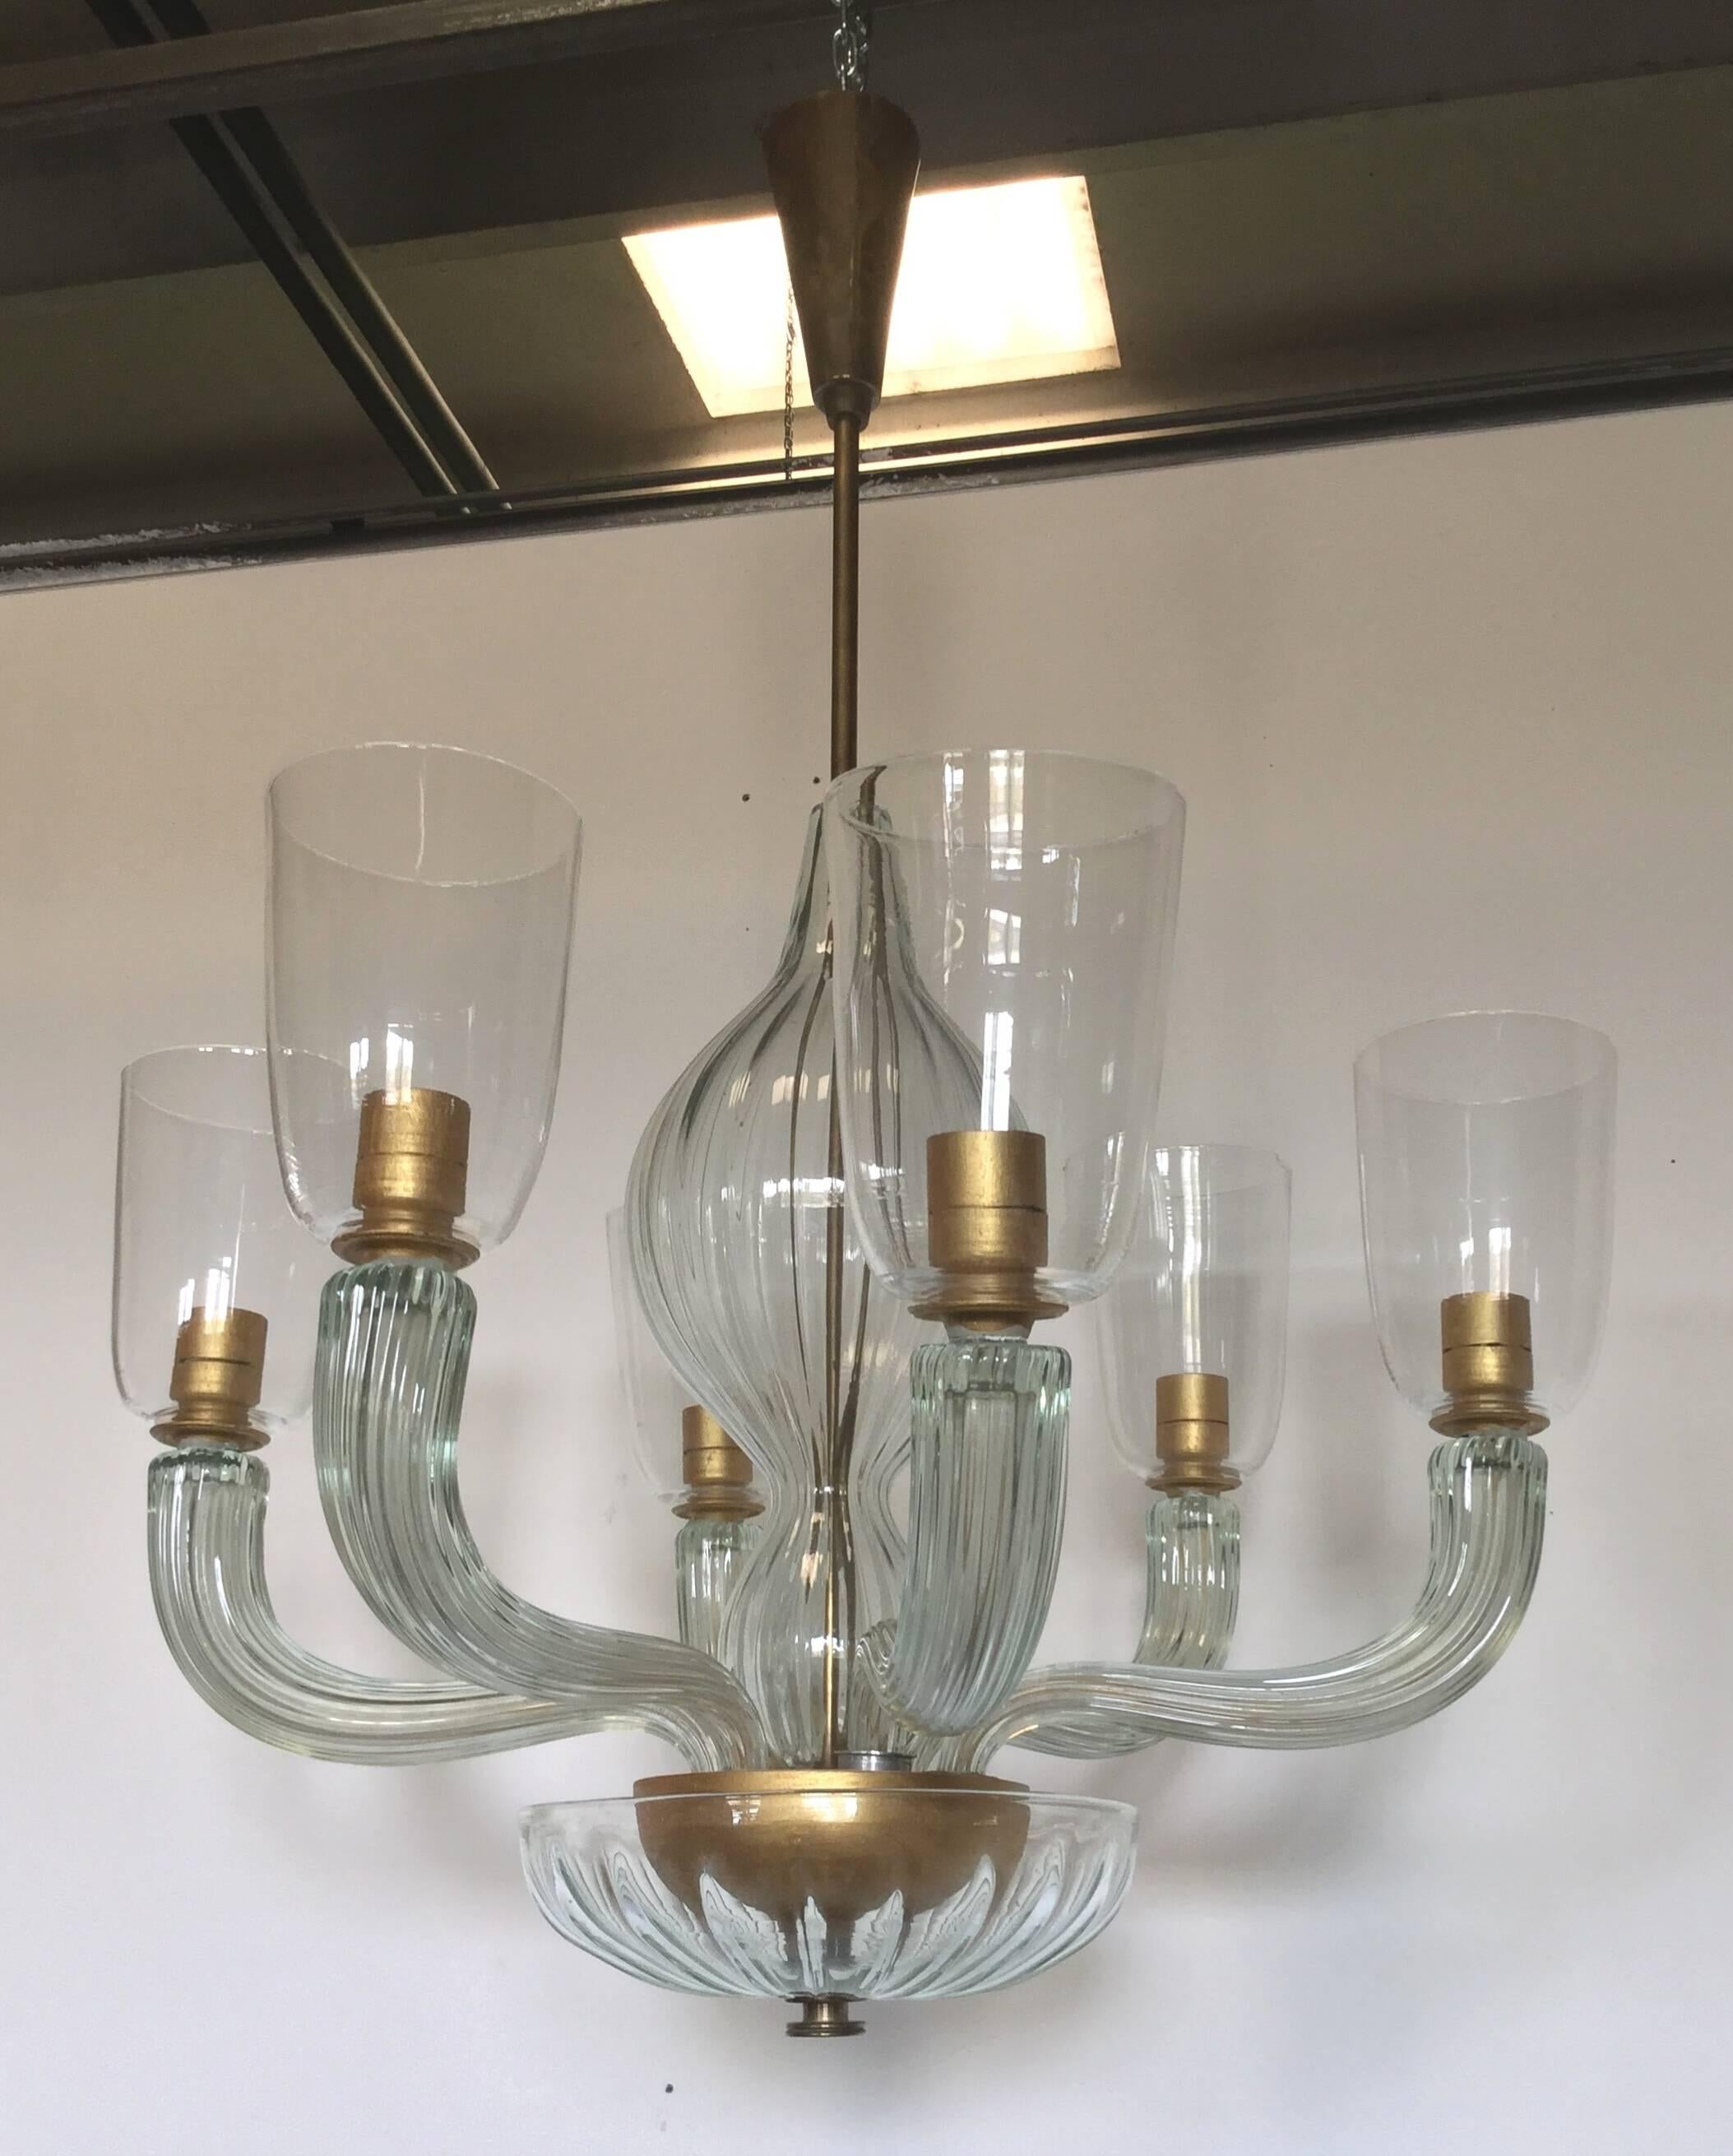 Beveled Beautiful Venini Chandelier Attributed to Carlo Scarpa, 1940 For Sale